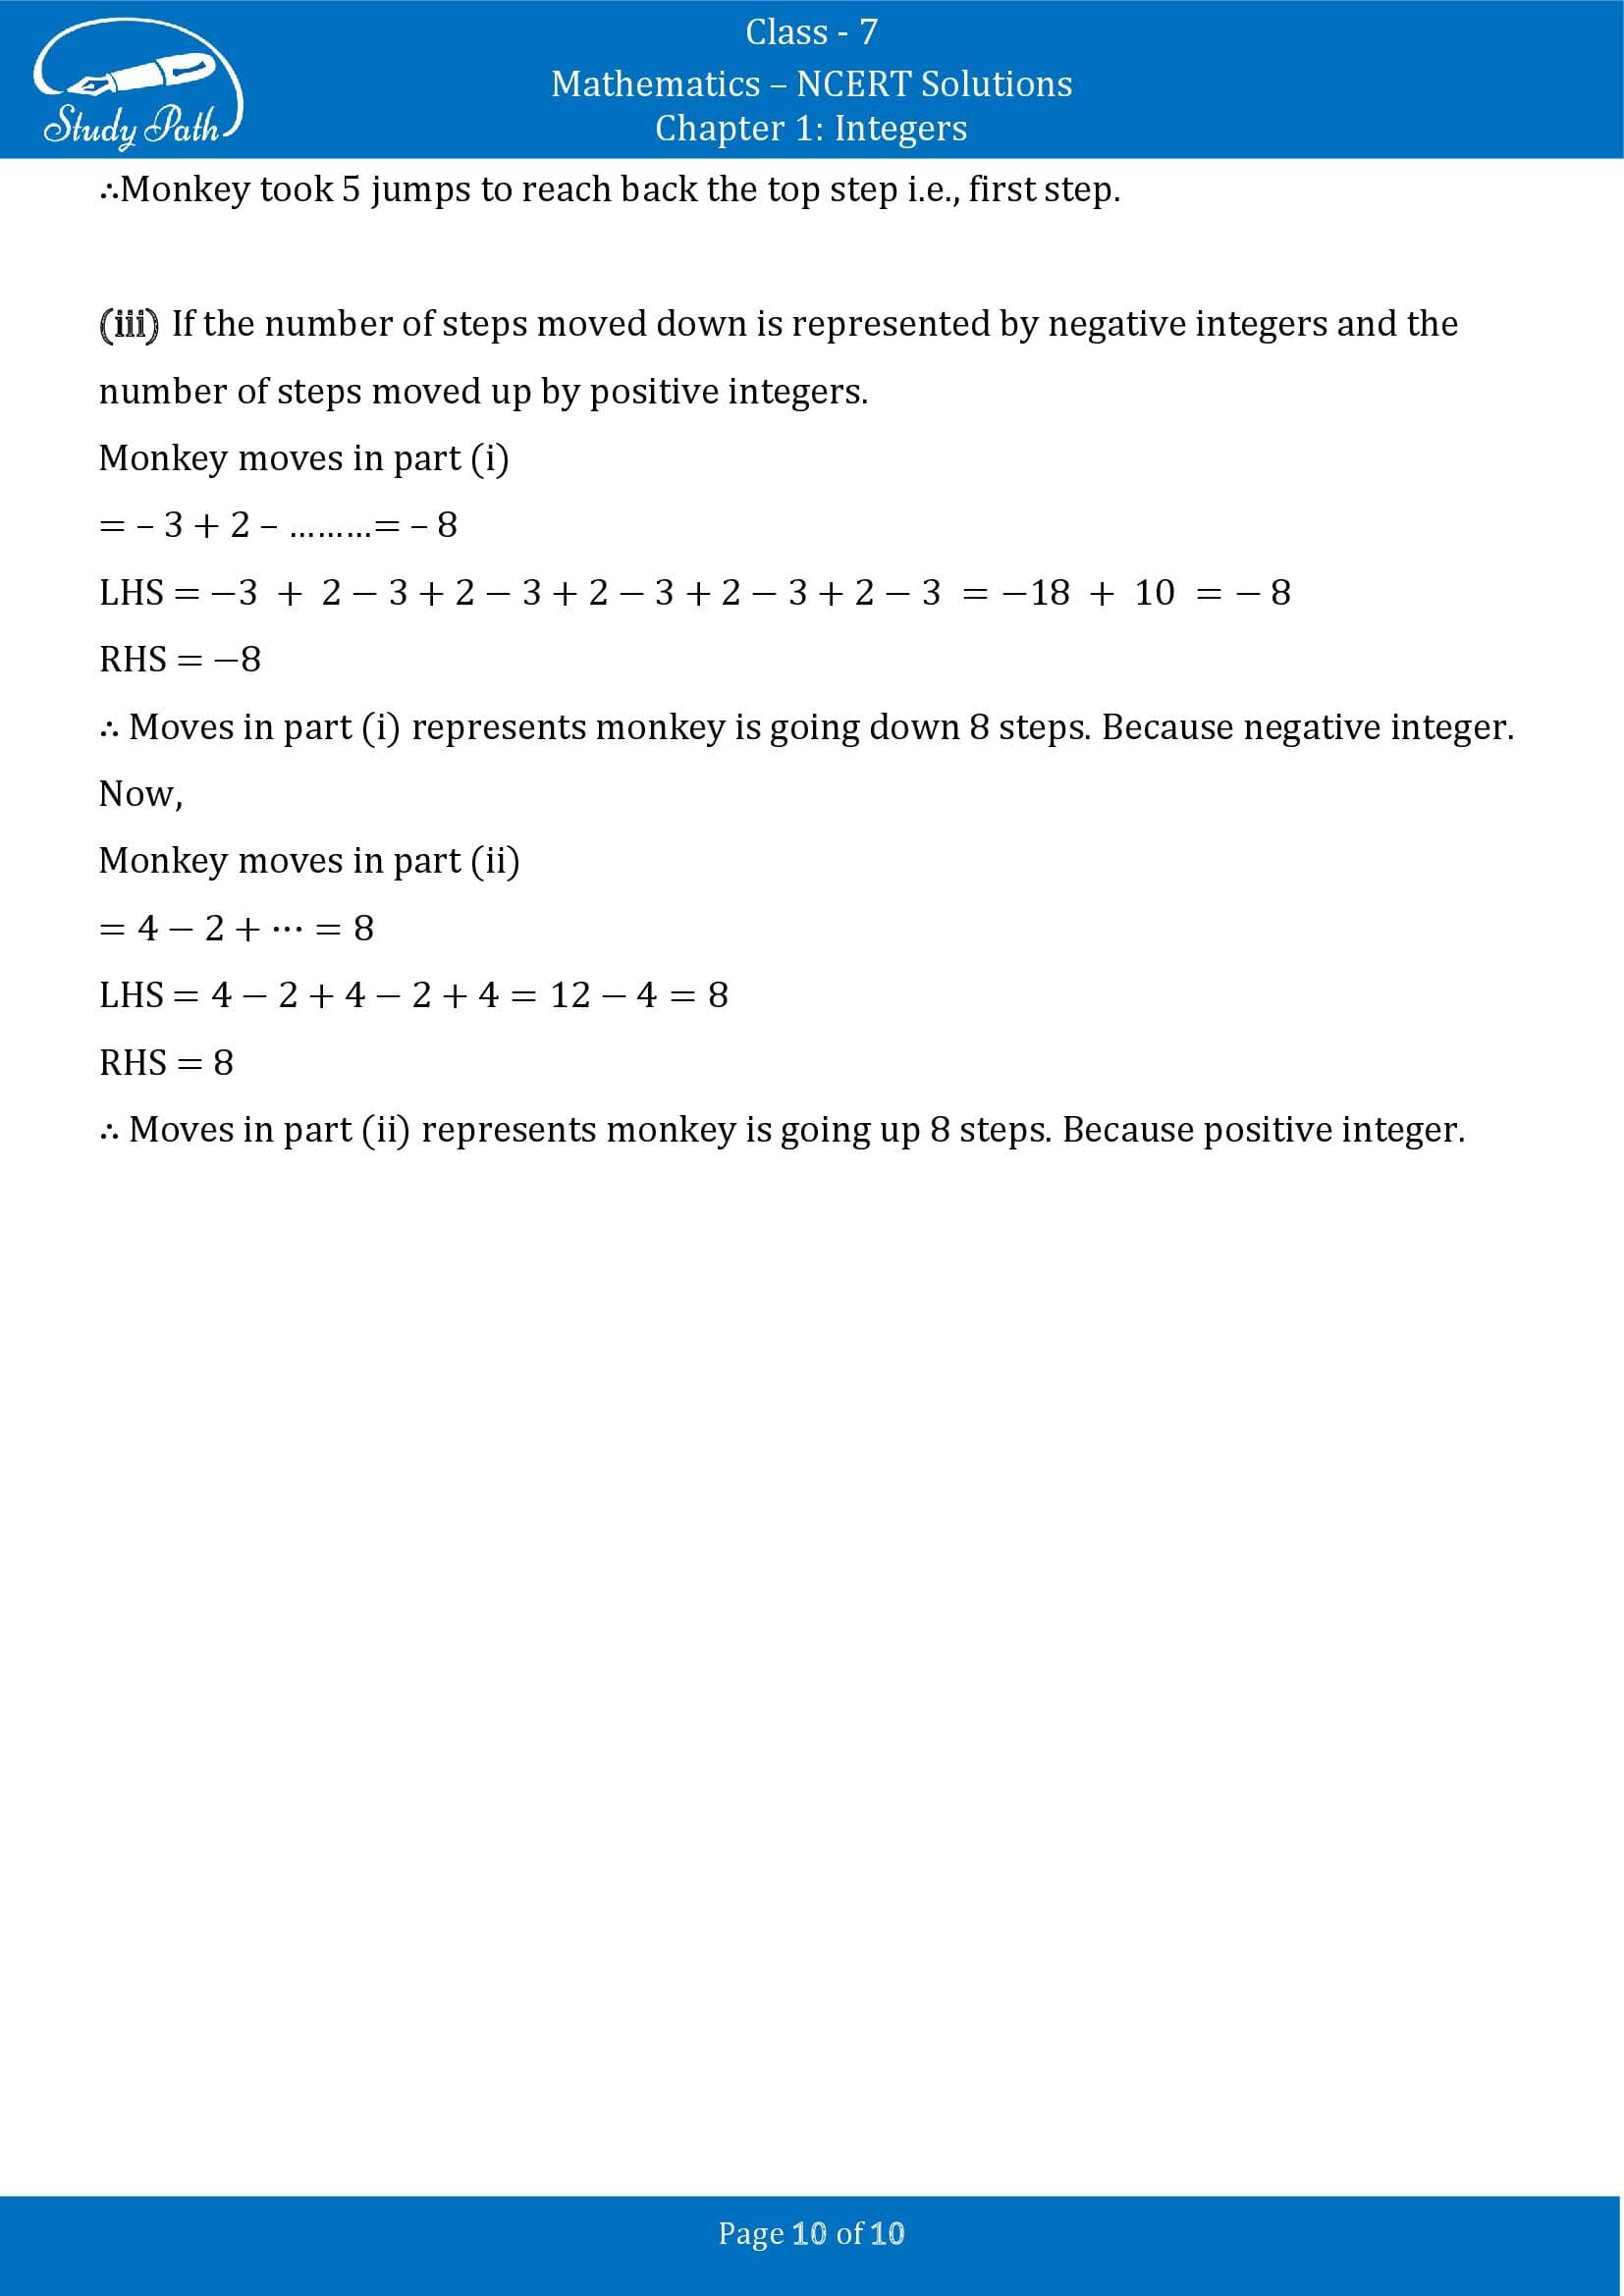 NCERT Solutions for Class 7 Maths Chapter 1 Integers Exercise 1.1 00010